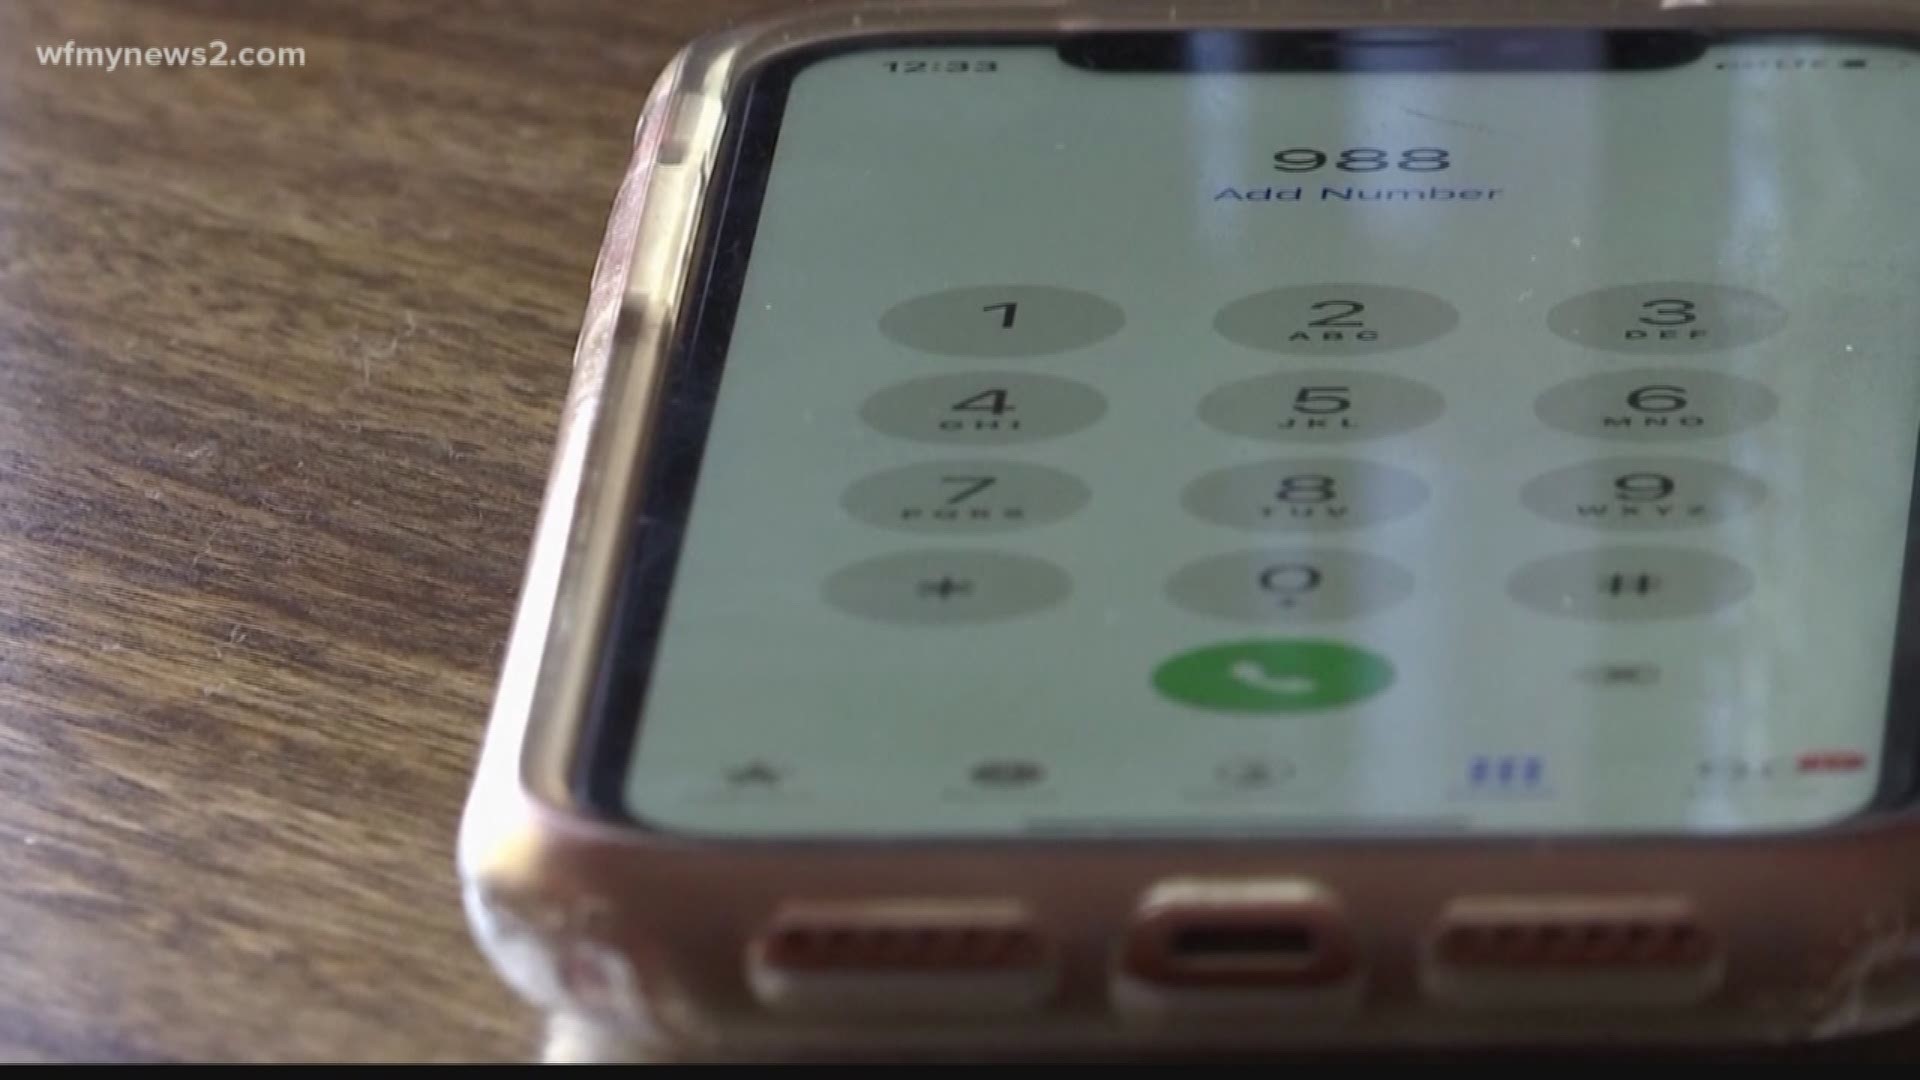 Similar to 911, the 10-digit hotline would become three digits, 988, to help those in need.